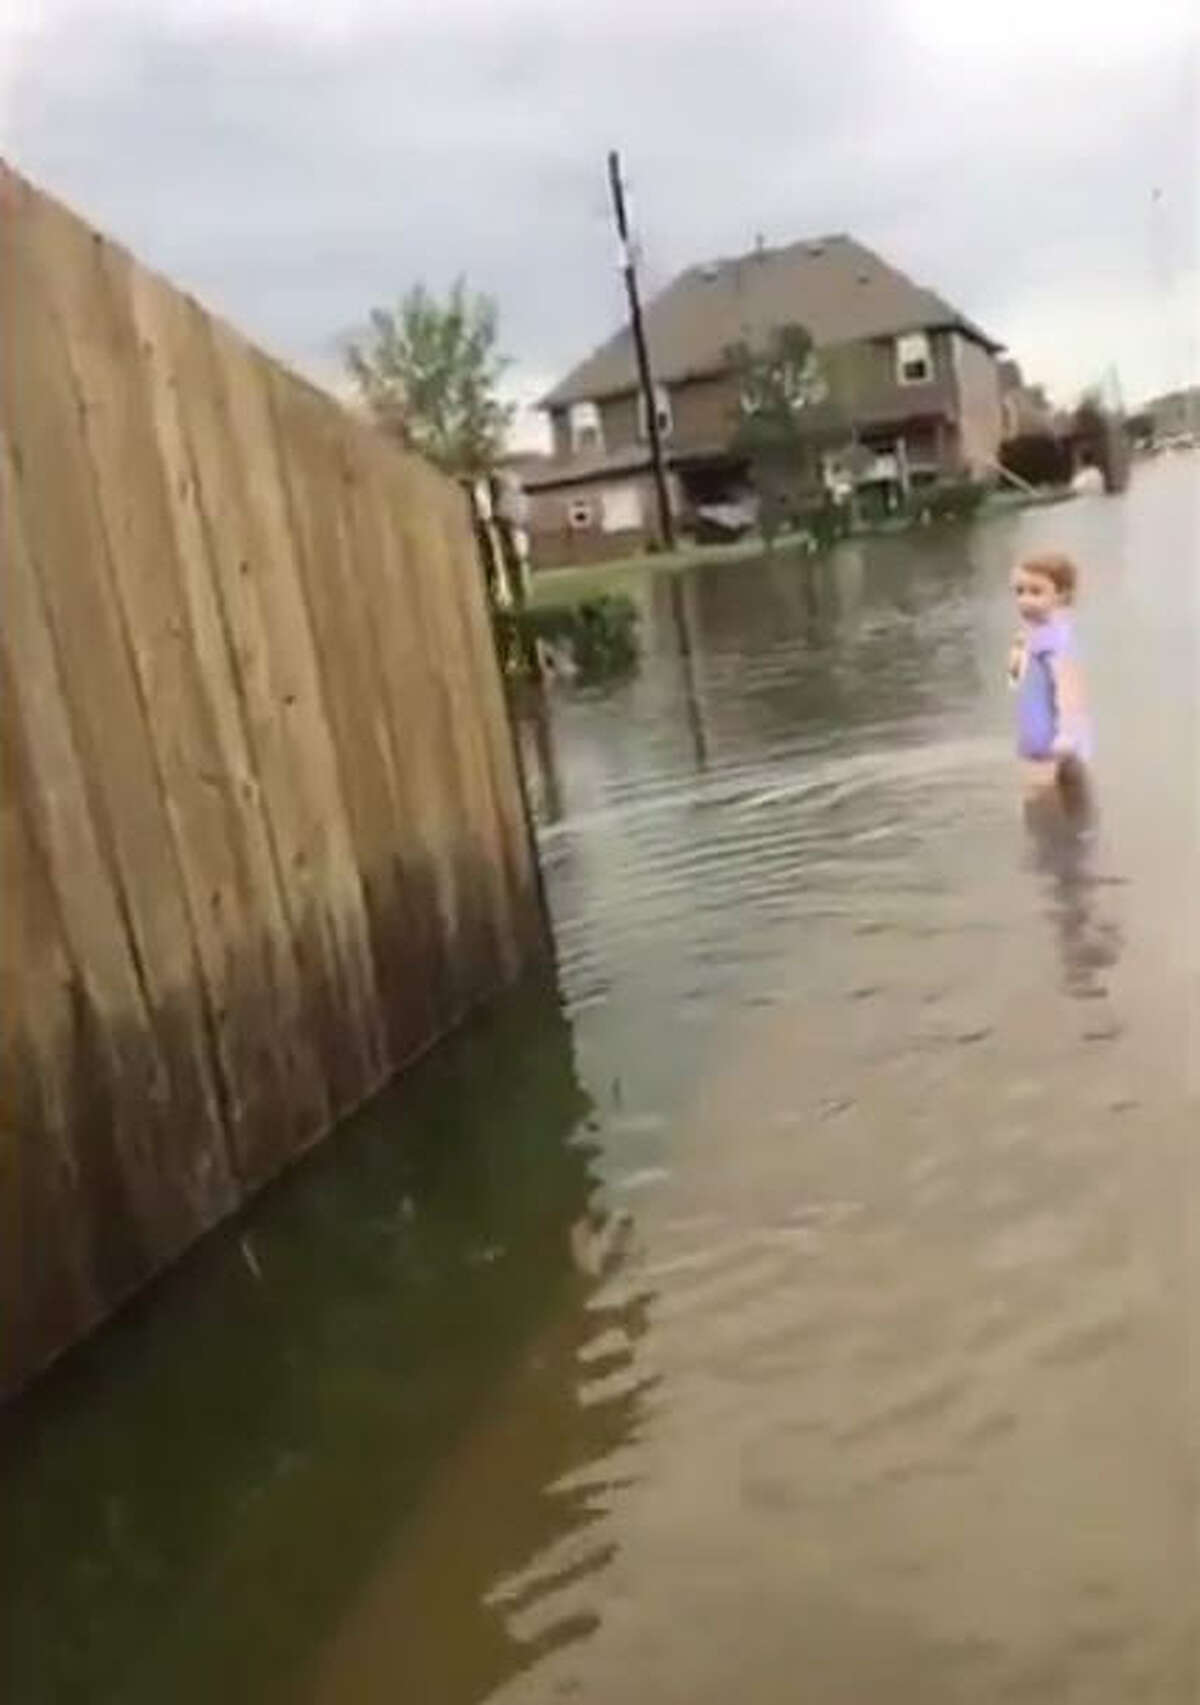 Videos taken by Pearland teen Renz Michael show a little girl in a diaper clutching her sippy cup wandering the flooded streets during Harvey. Keep going through the gallery to see other shocking photos of what the Houston area looks like during Harvey.Source: Twitter